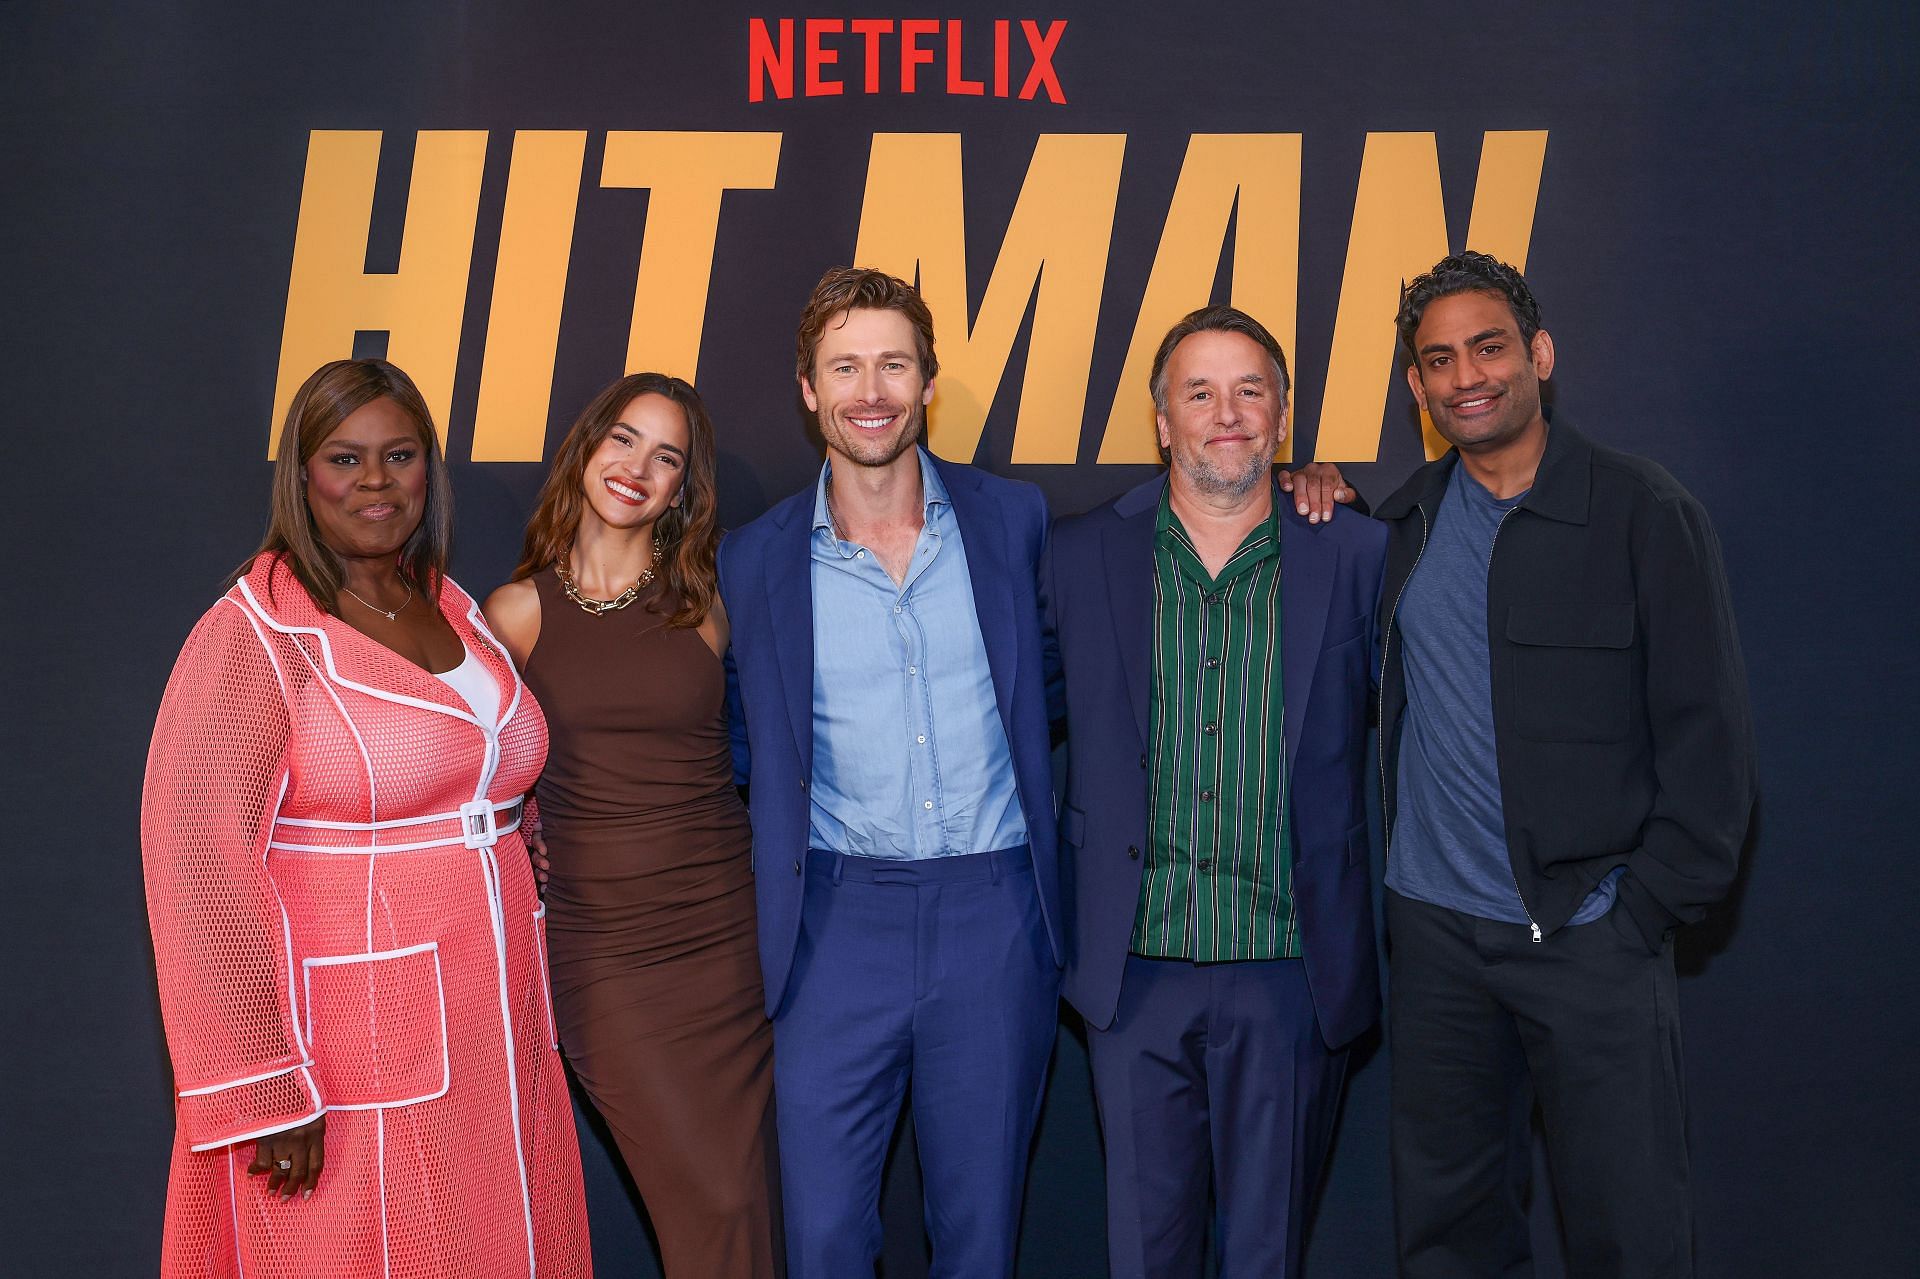 Cast and crew members of this film (Photo by Rick Kern/Getty Images for Netflix)